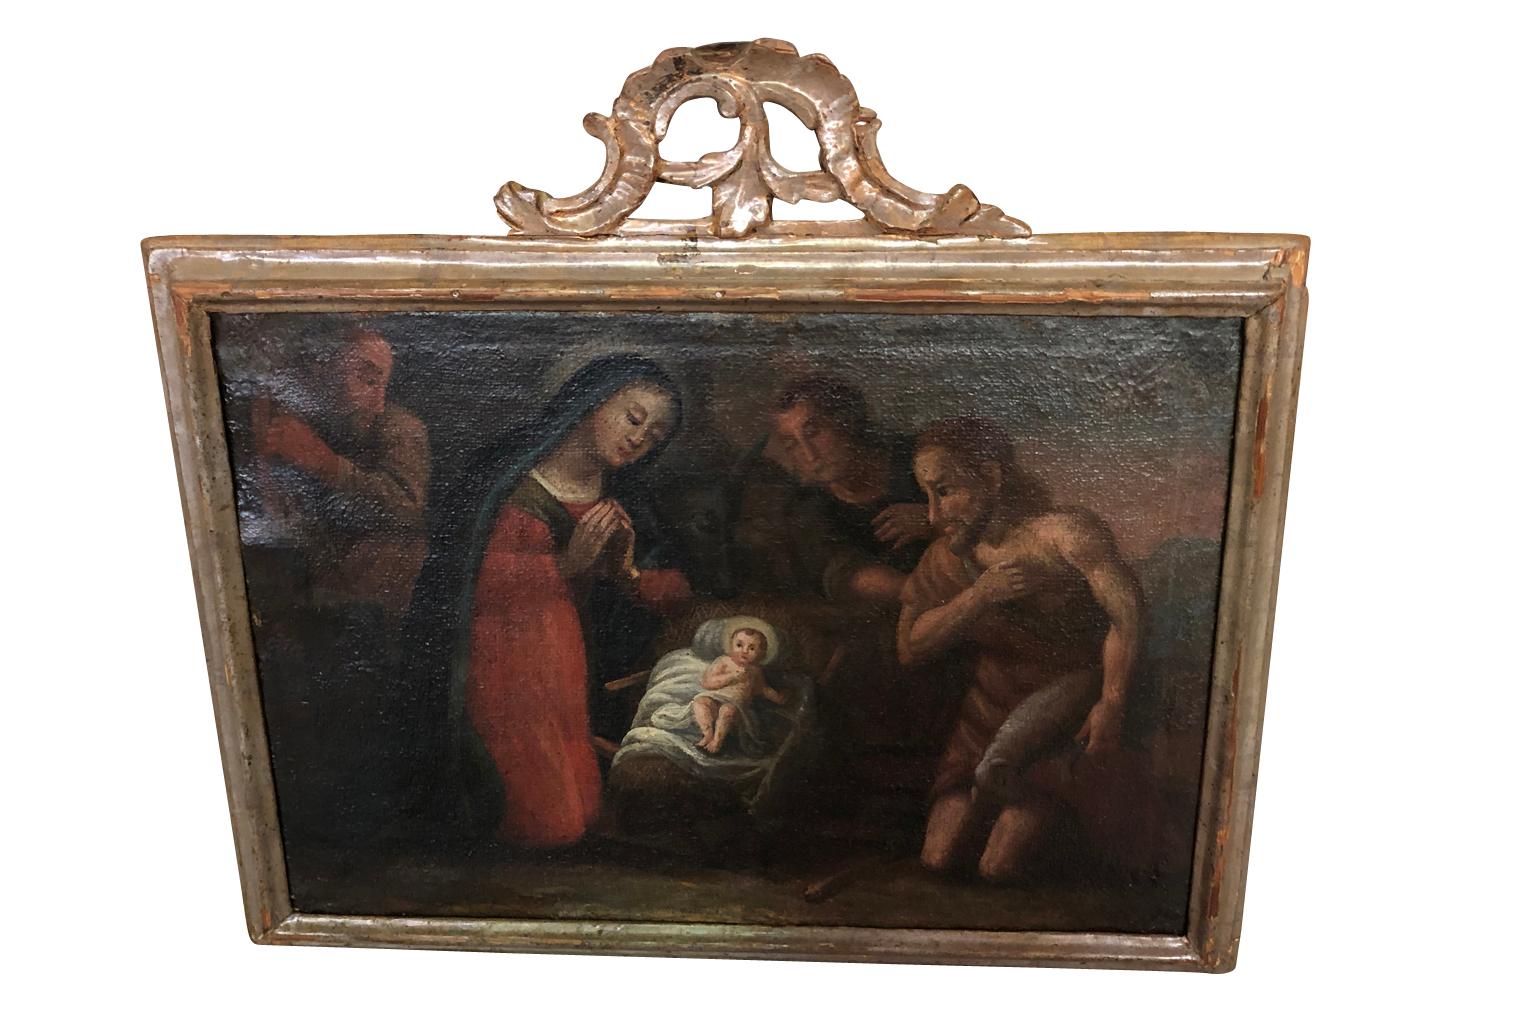 A stunning Spanish 18th century oil painting of the nativity housed in its original giltwood frame. Beautiful brushwork and detail. A wonderful piece of art.